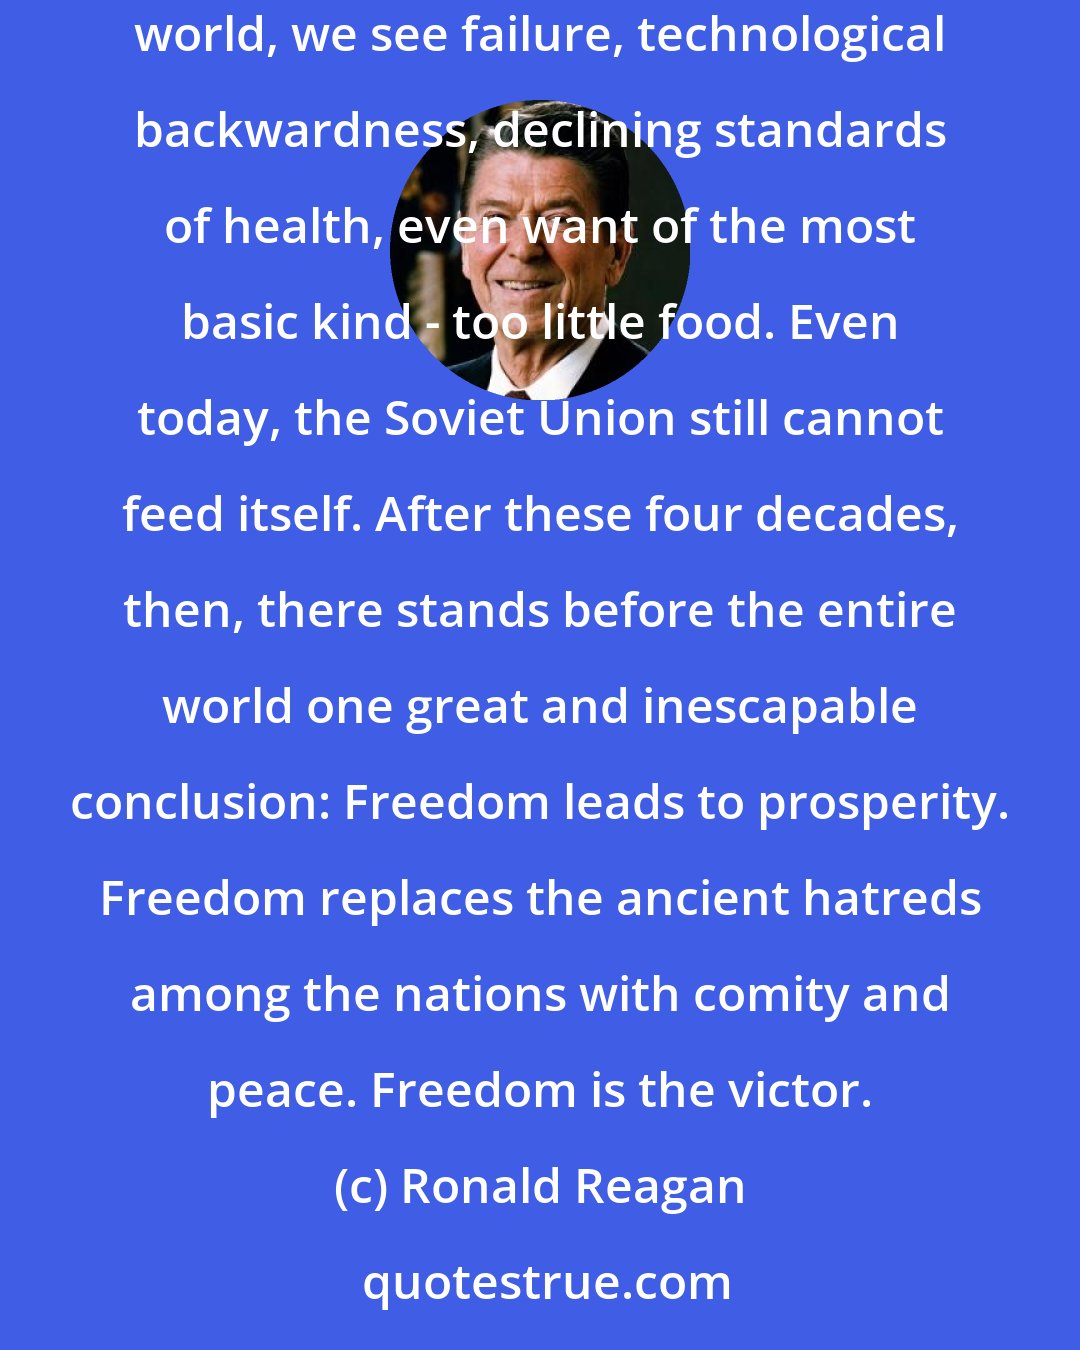 Ronald Reagan: But in the West today, we see a free world that has achieved a level of prosperity and well-being unprecedented in all human history. In the Communist world, we see failure, technological backwardness, declining standards of health, even want of the most basic kind - too little food. Even today, the Soviet Union still cannot feed itself. After these four decades, then, there stands before the entire world one great and inescapable conclusion: Freedom leads to prosperity. Freedom replaces the ancient hatreds among the nations with comity and peace. Freedom is the victor.